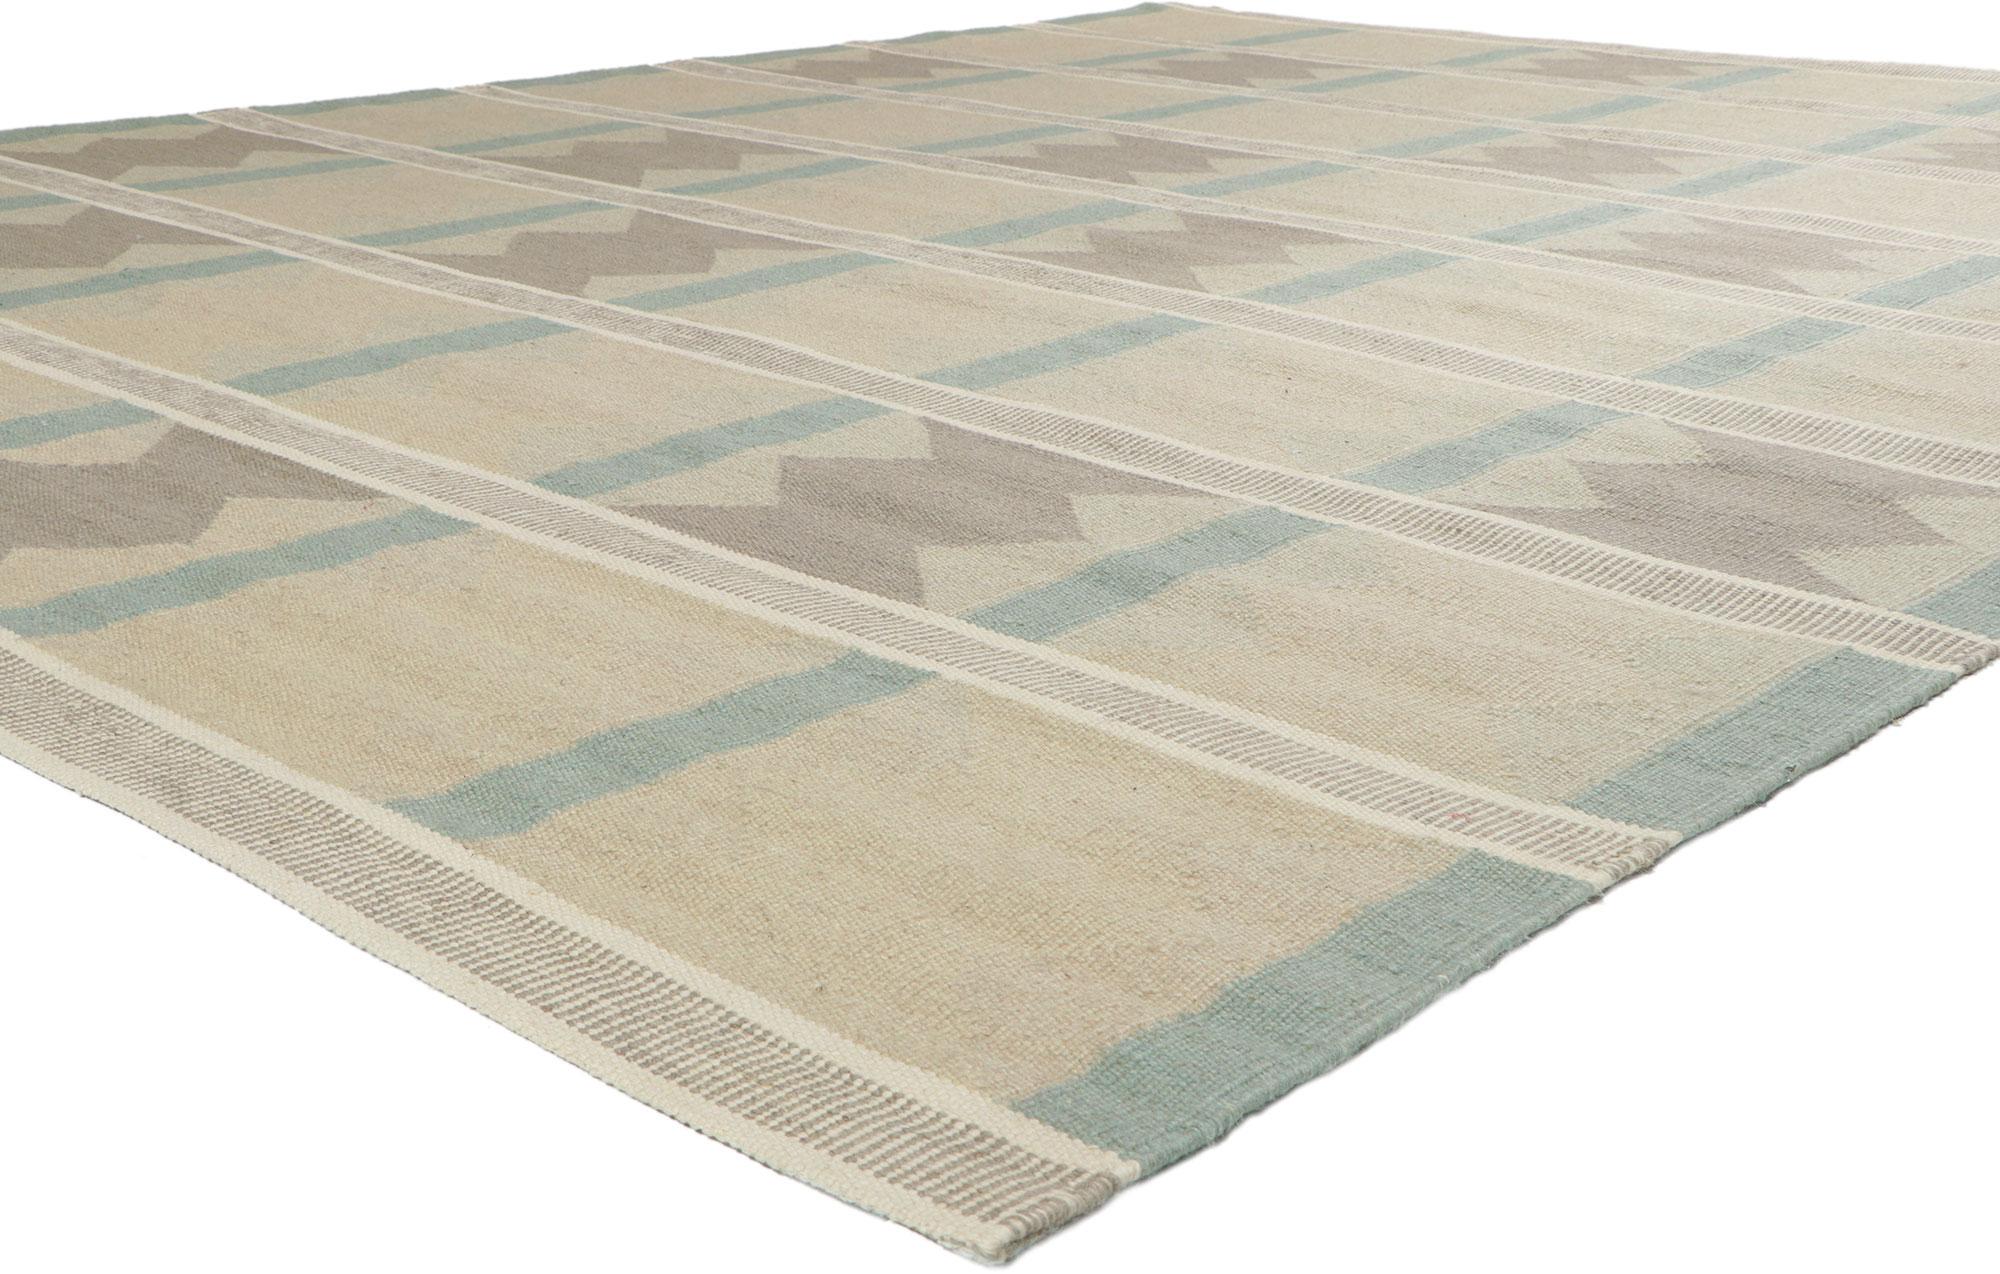 30845 New Swedish Ingegerd Silow Inspired Kilim rug with Scandinavian Modern Style 10'05 x 13'05. With its simplicity, geometric design and soft colors, this hand-woven wool Swedish inspired Kilim rug provides a feeling of cozy contentment without